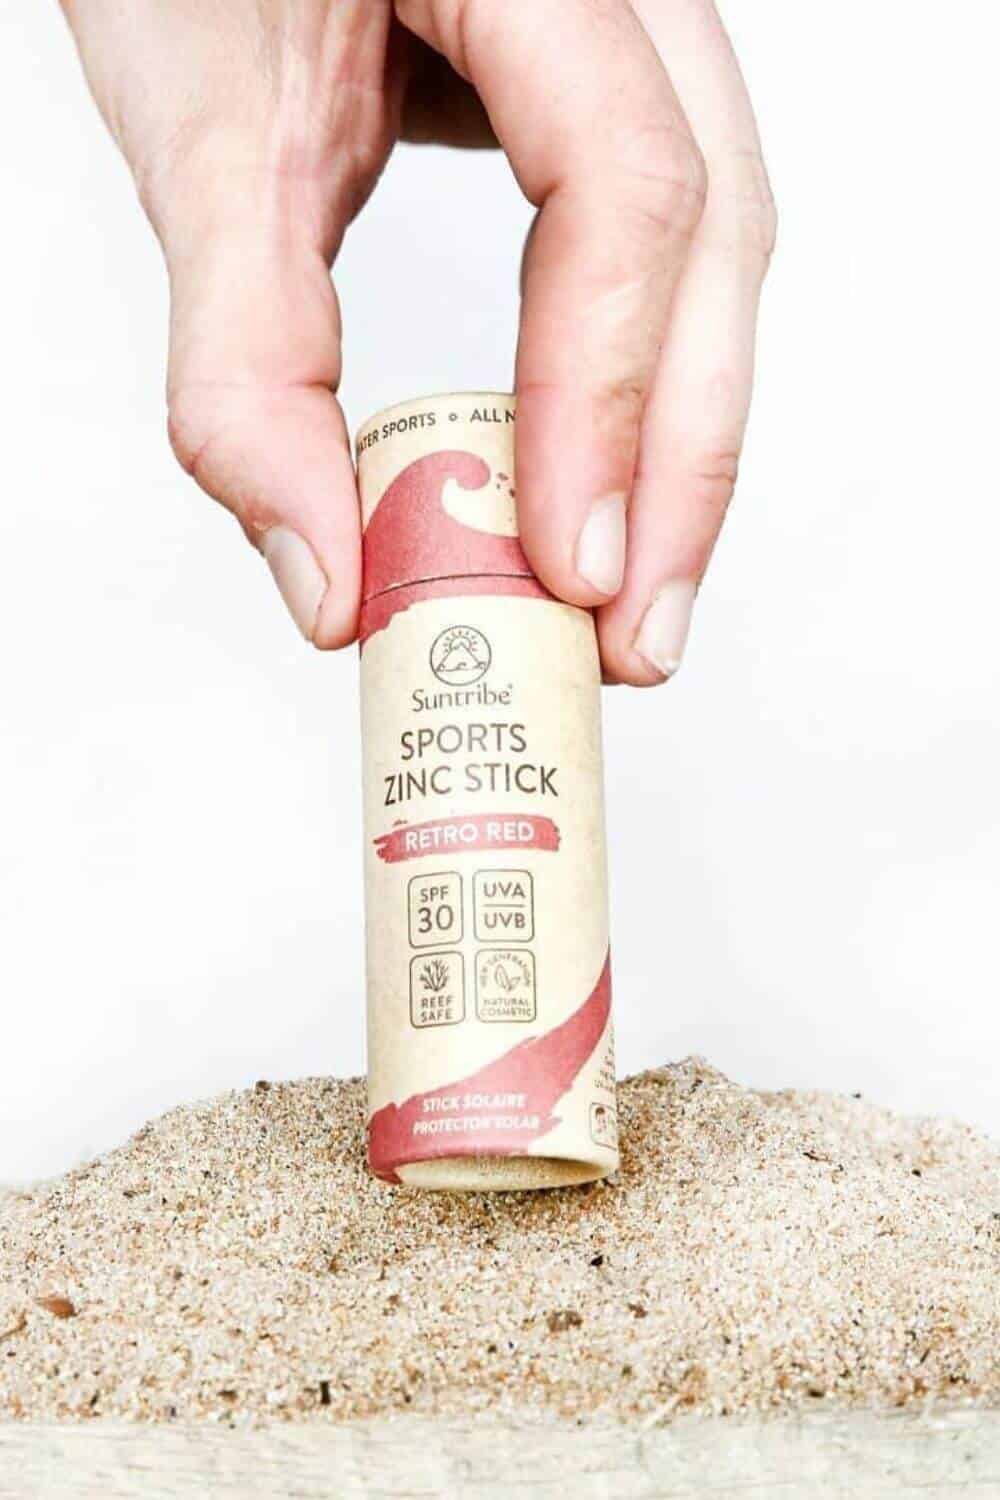 We’ve talked about reef-safe vegan sunscreen before, but this time we’re taking it a step further and looking for the best zero waste sunscreen. After all, plastic bottles aren’t good for the sea either. Image by Suntribe Sunscreen #zerowastesunscreen